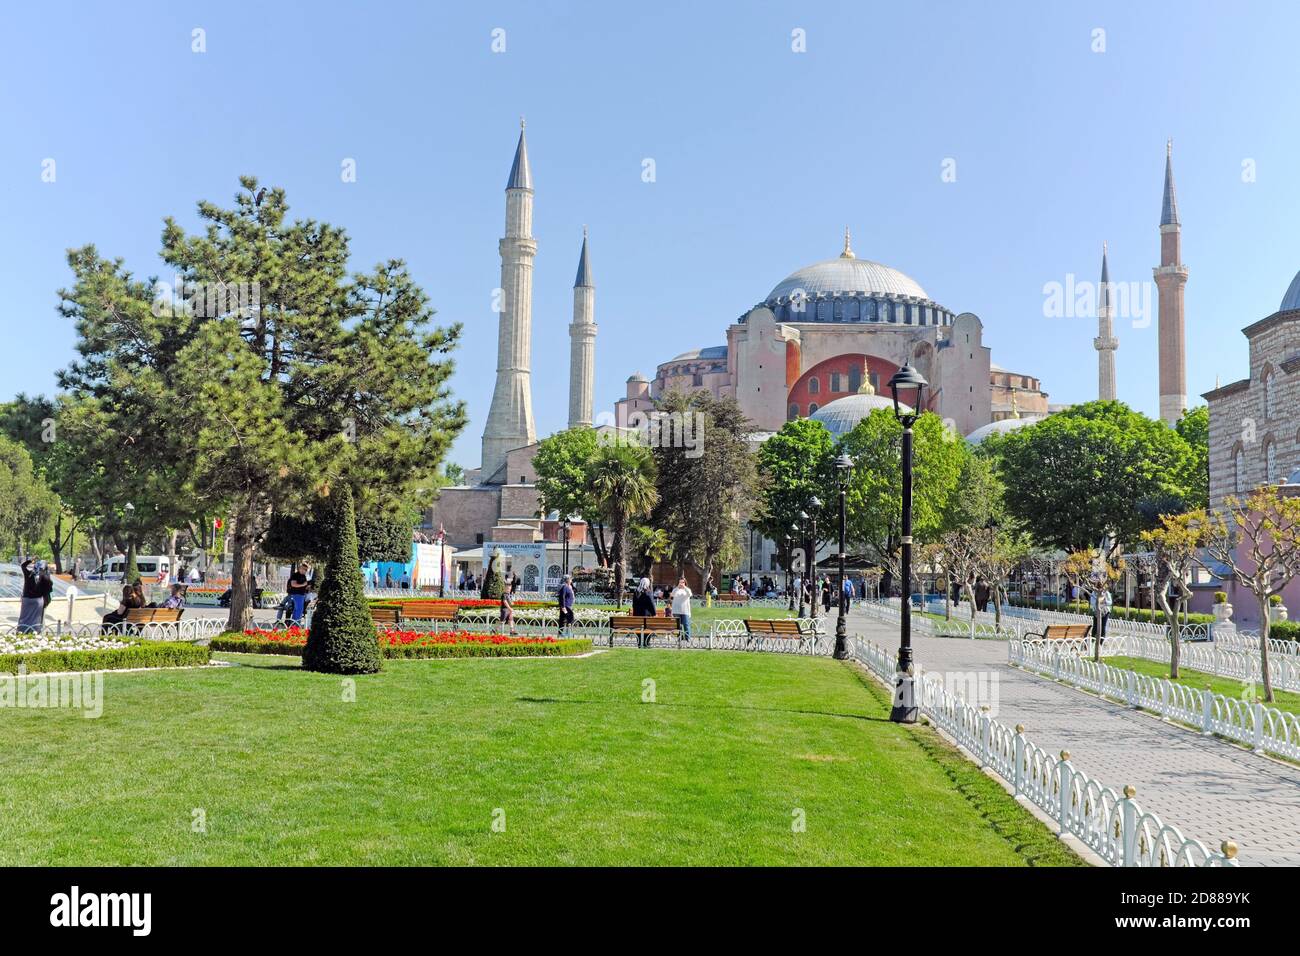 The Hagia Sophia Holy Grand Mosque, formerly the Church of Hagia Sophia, in Sultanahmet in Istanbul, Turkey, reverted to a functioning mosque in 2020. Stock Photo